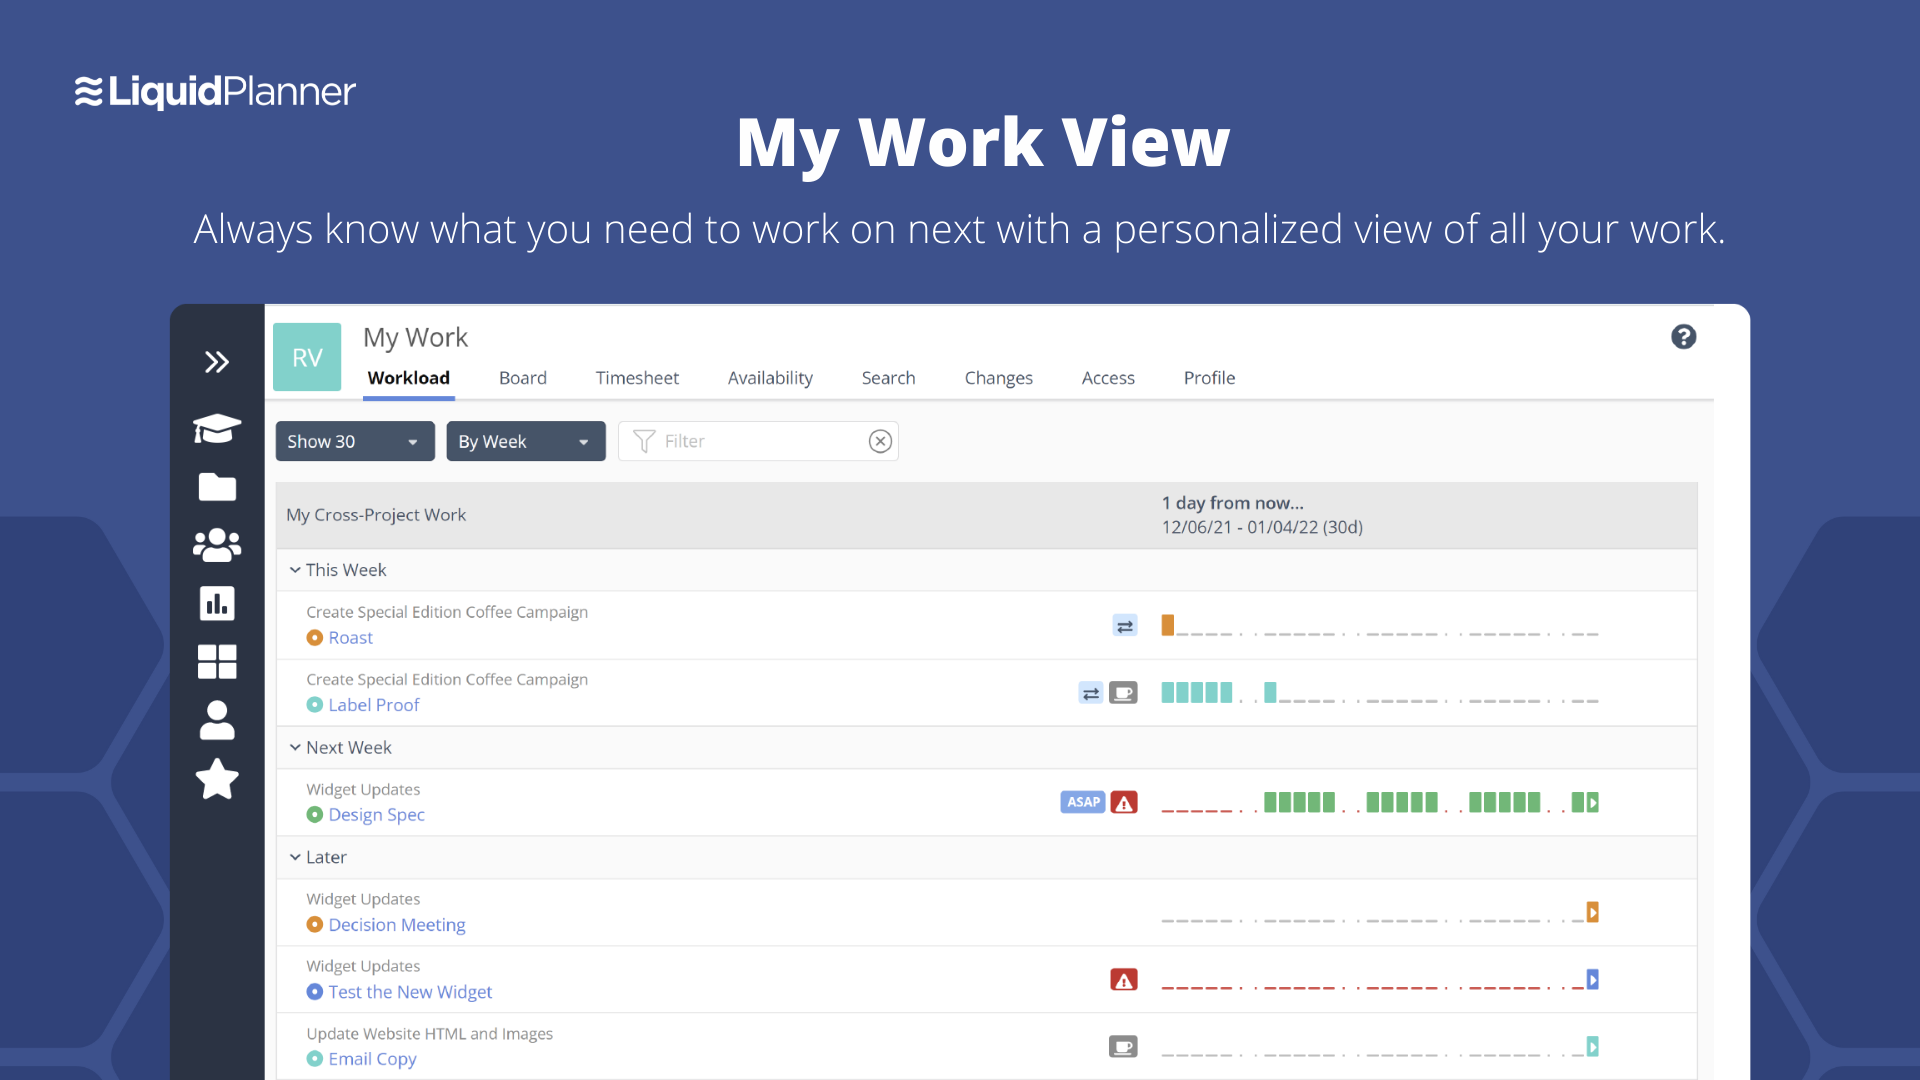 LiquidPlanner - My Work View is a personalized view of all your work to always know what you need to work on next.